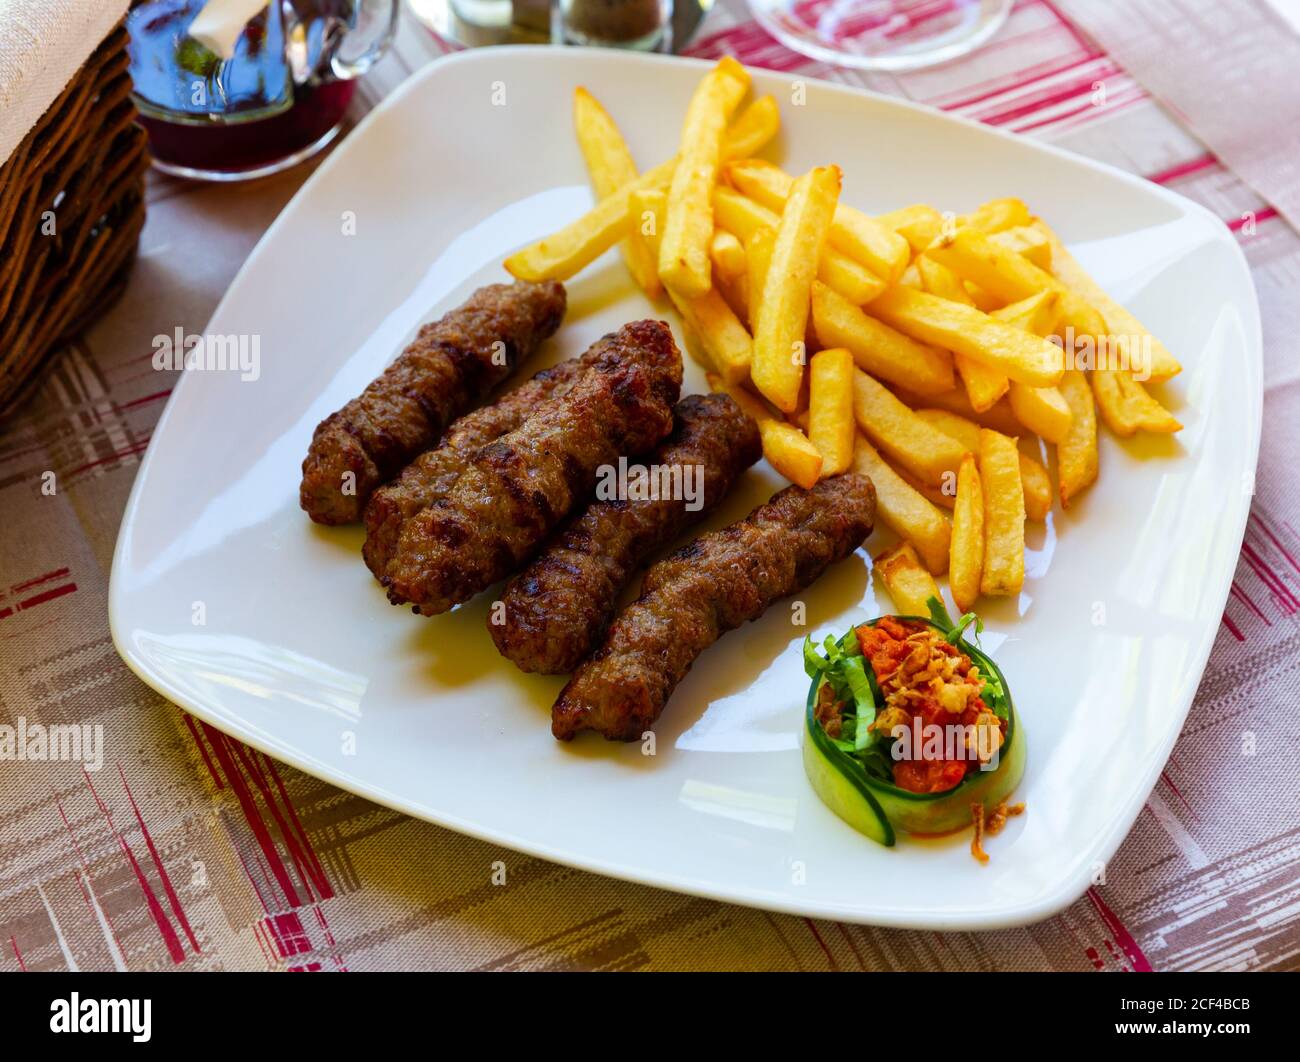 Cevapi - grilled dish of minced meat with french fries. Balkan cuisine Stock Photo